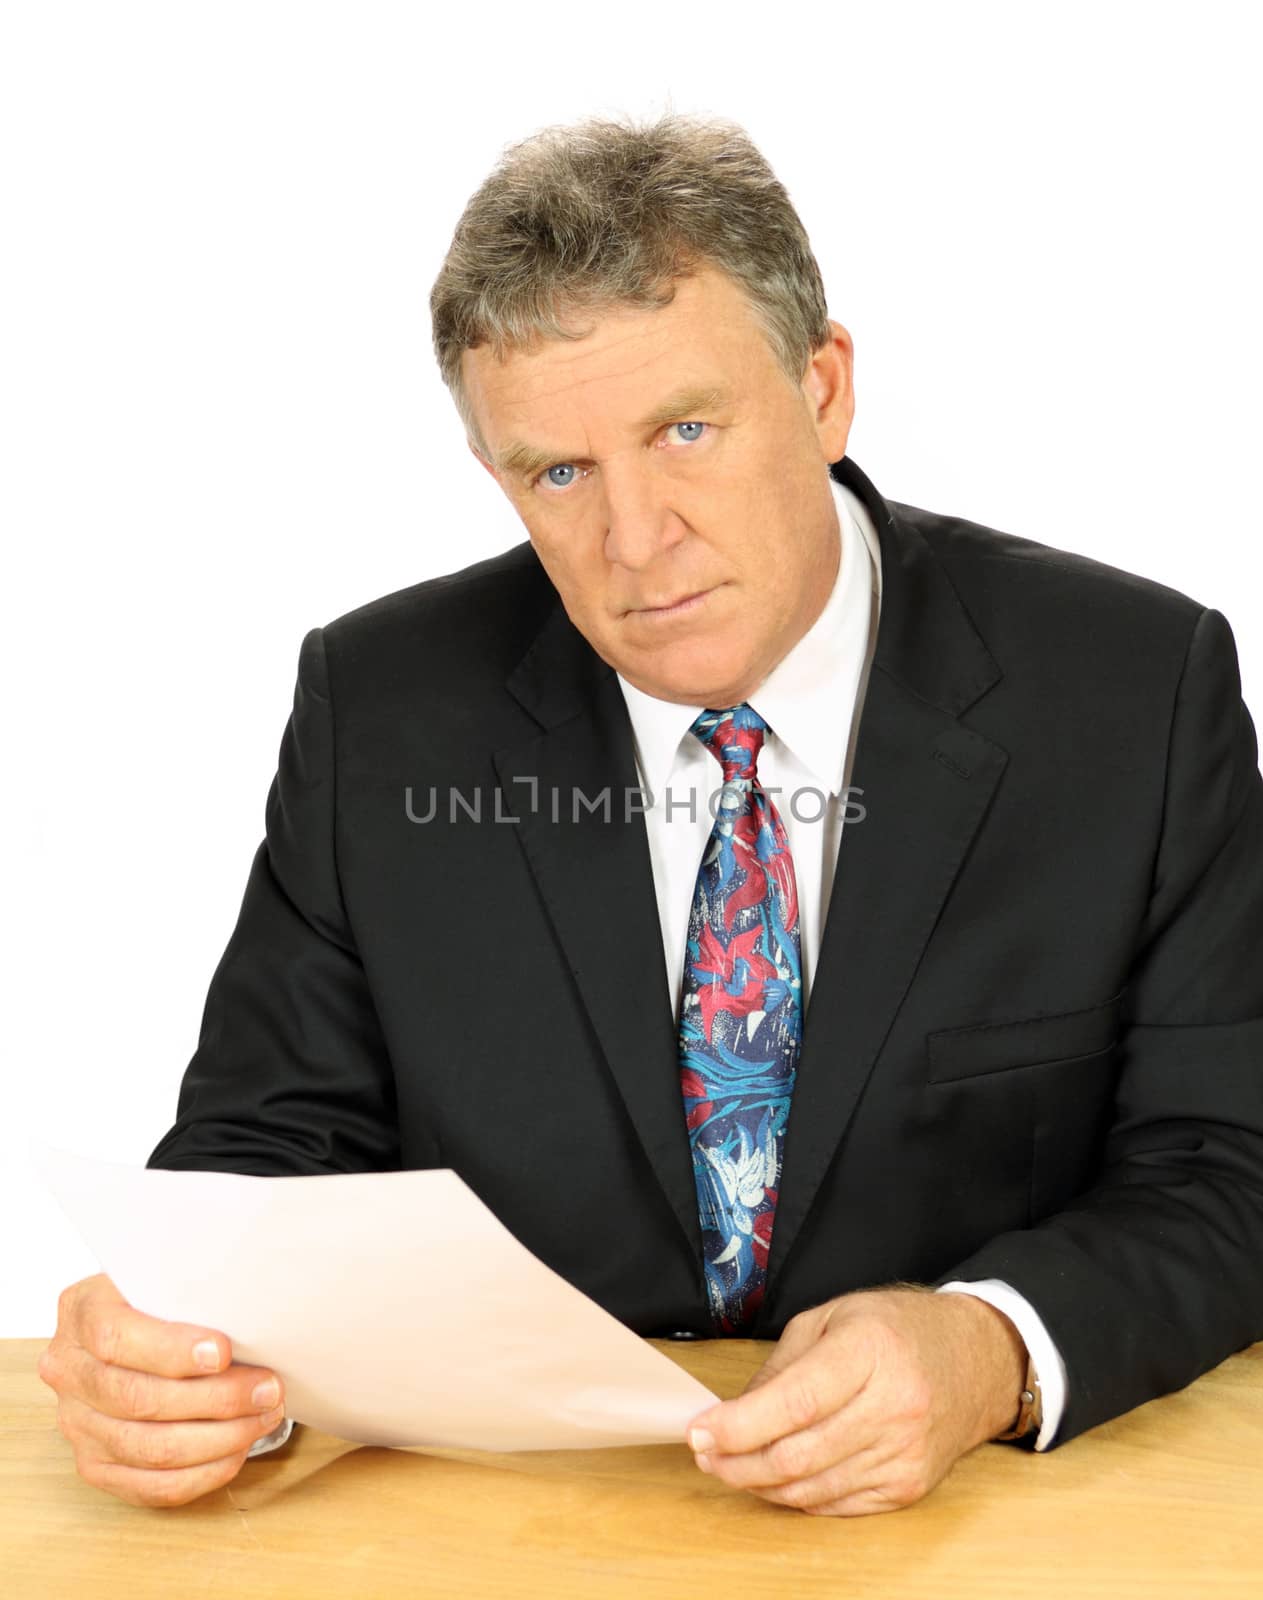 Resolute middle aged businessman with a steely glare sitting at desk.